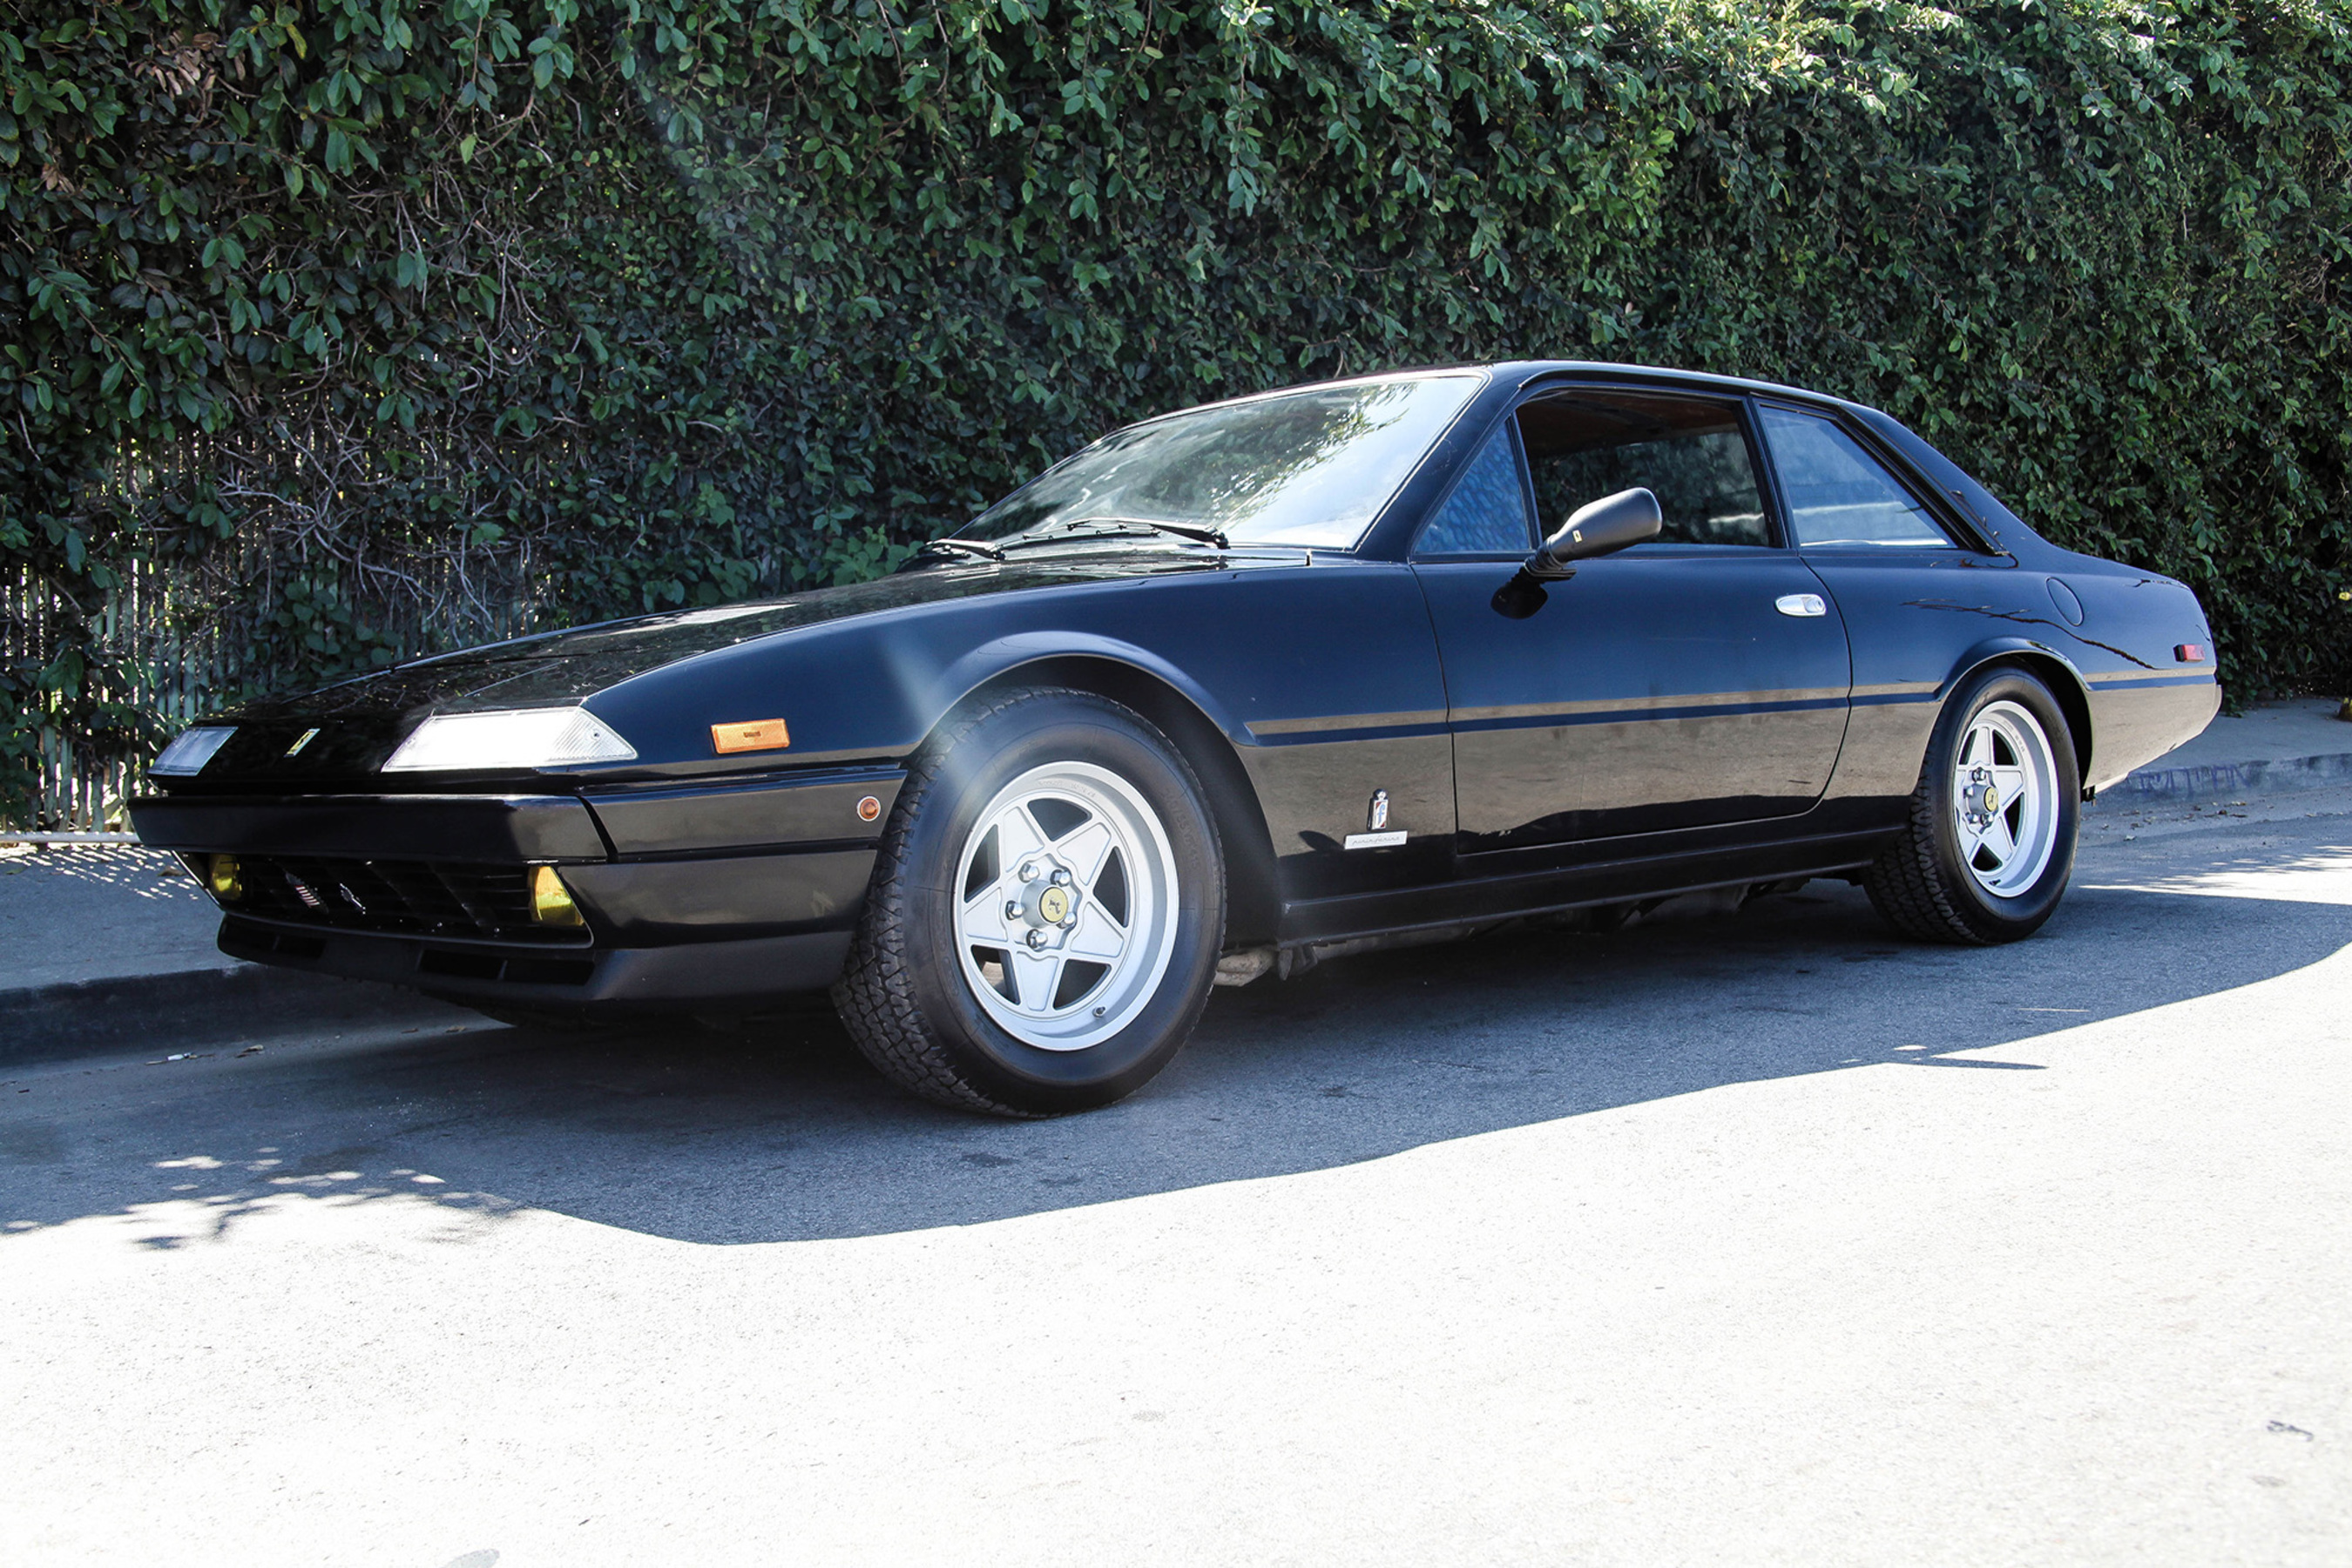 Beverly Hills Car Club launches October 10 eBay auction of 1983 Ferrari 400i once owned by Tennis Legend John McEnroe.